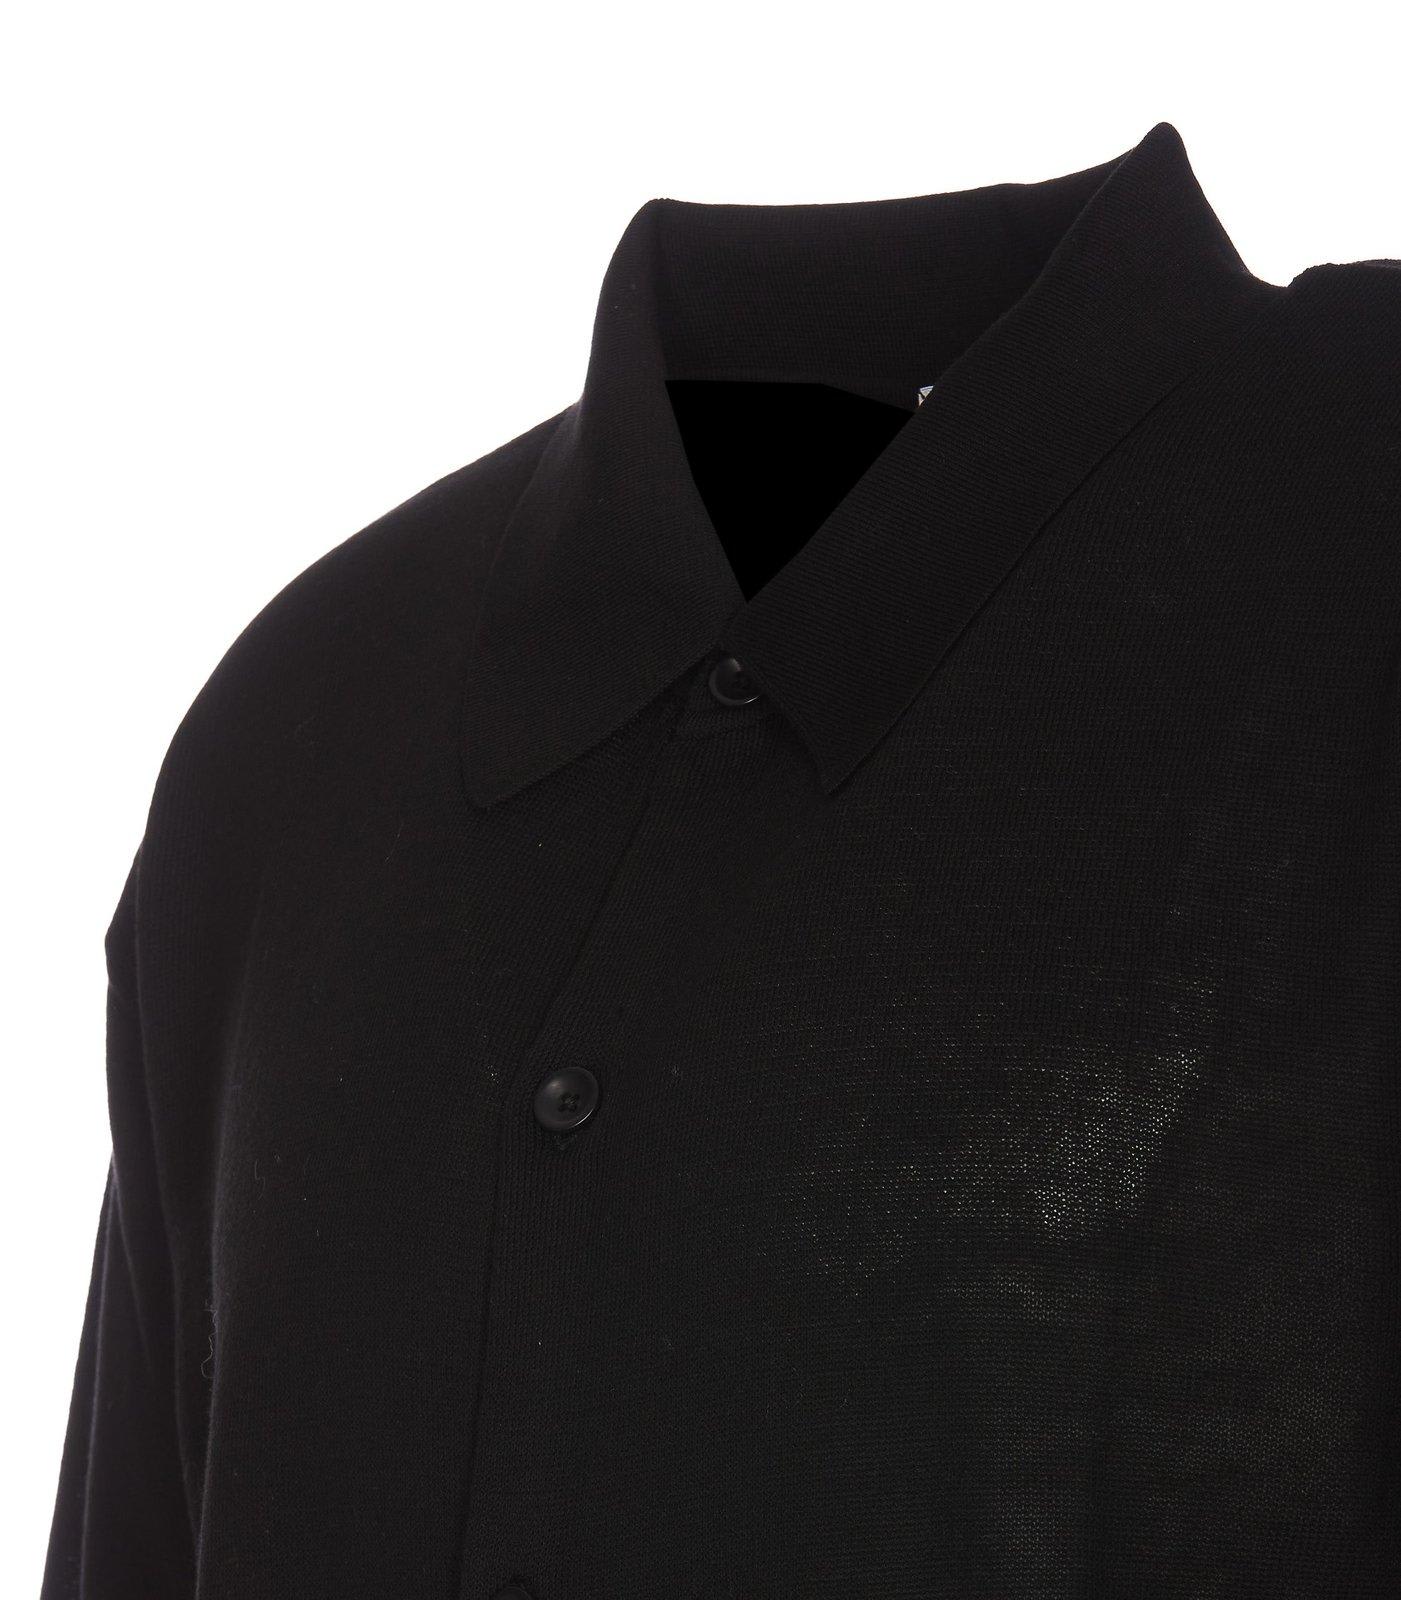 Shop Lemaire Short-sleeved Knitted Shirt In Black